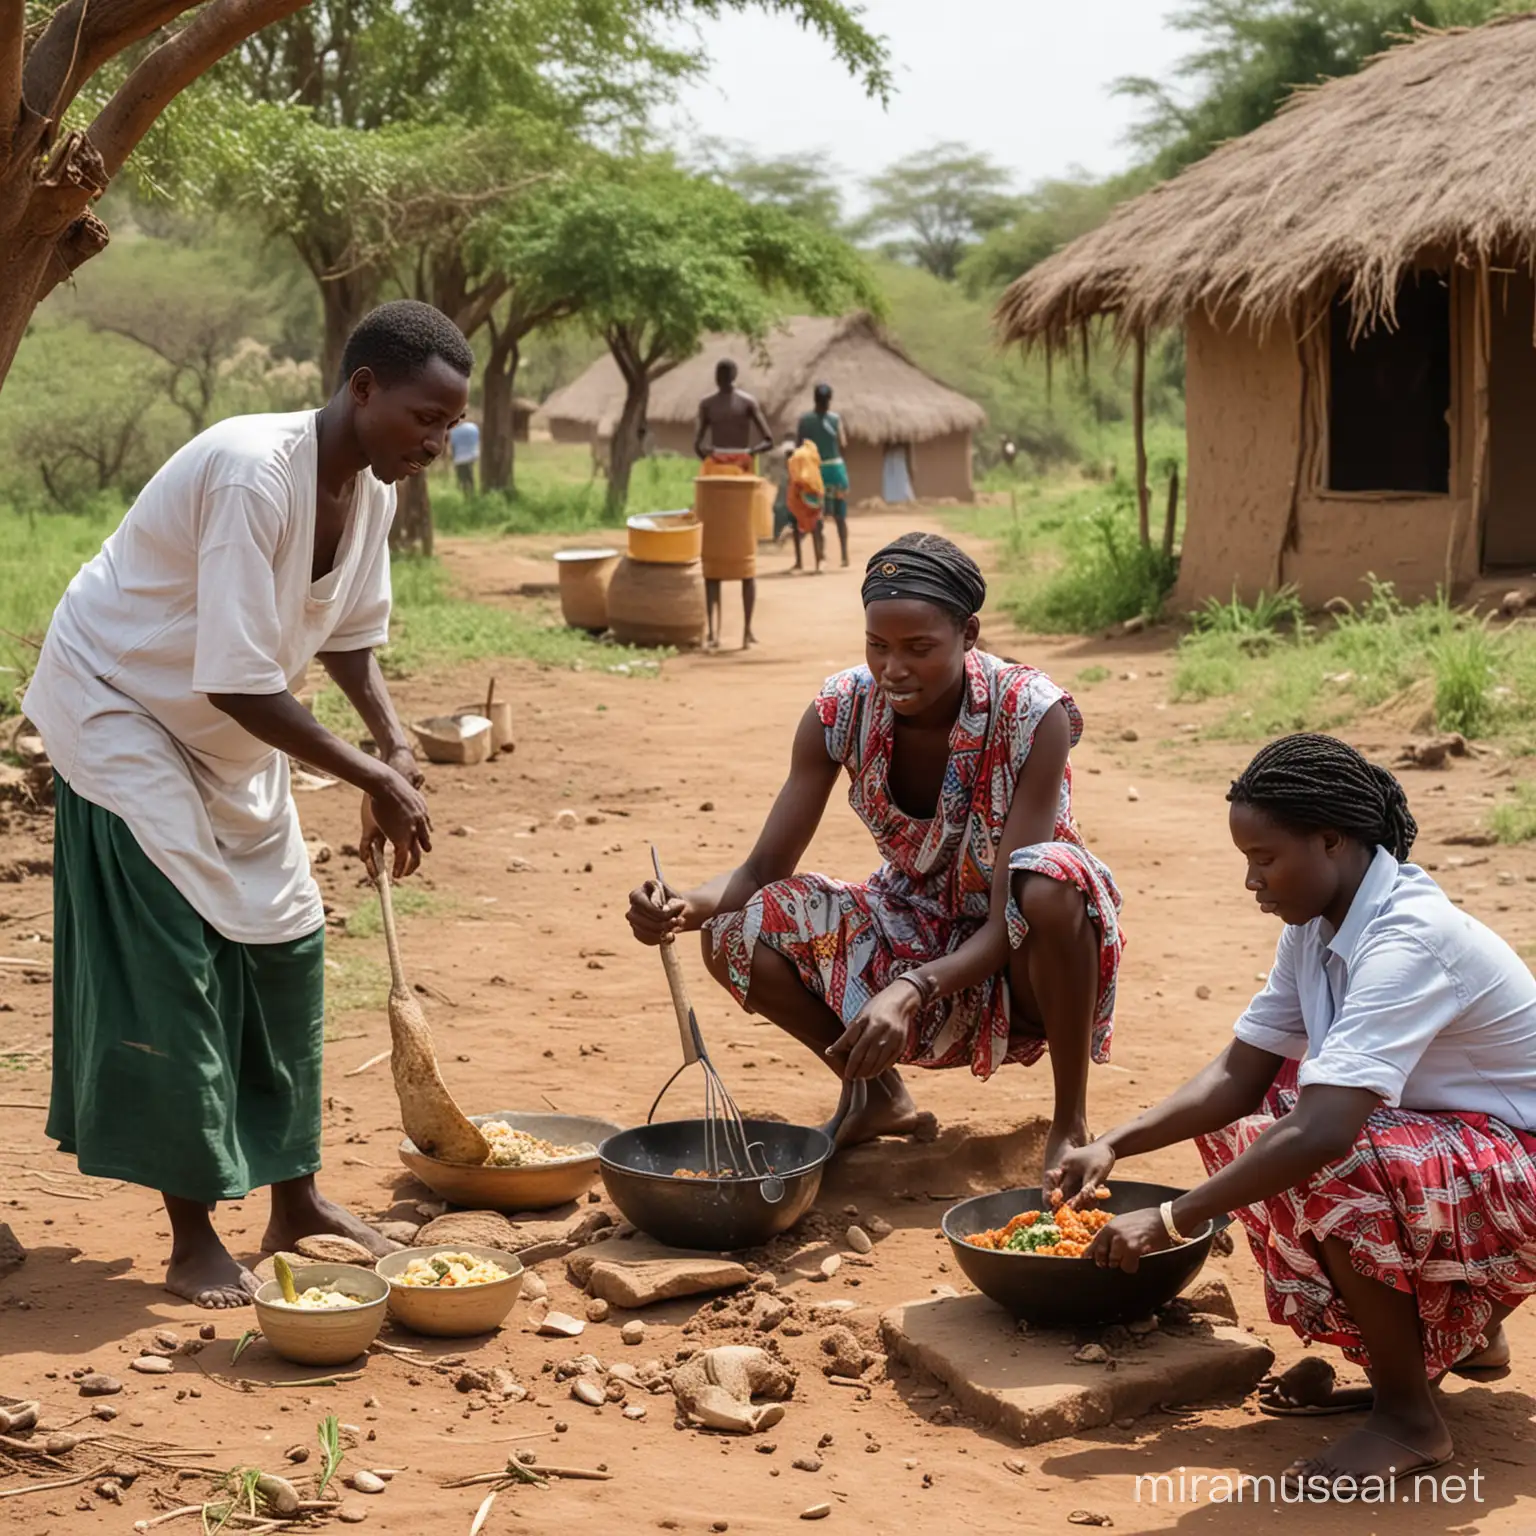 East Africans Cooking in Village Community Meal Preparation